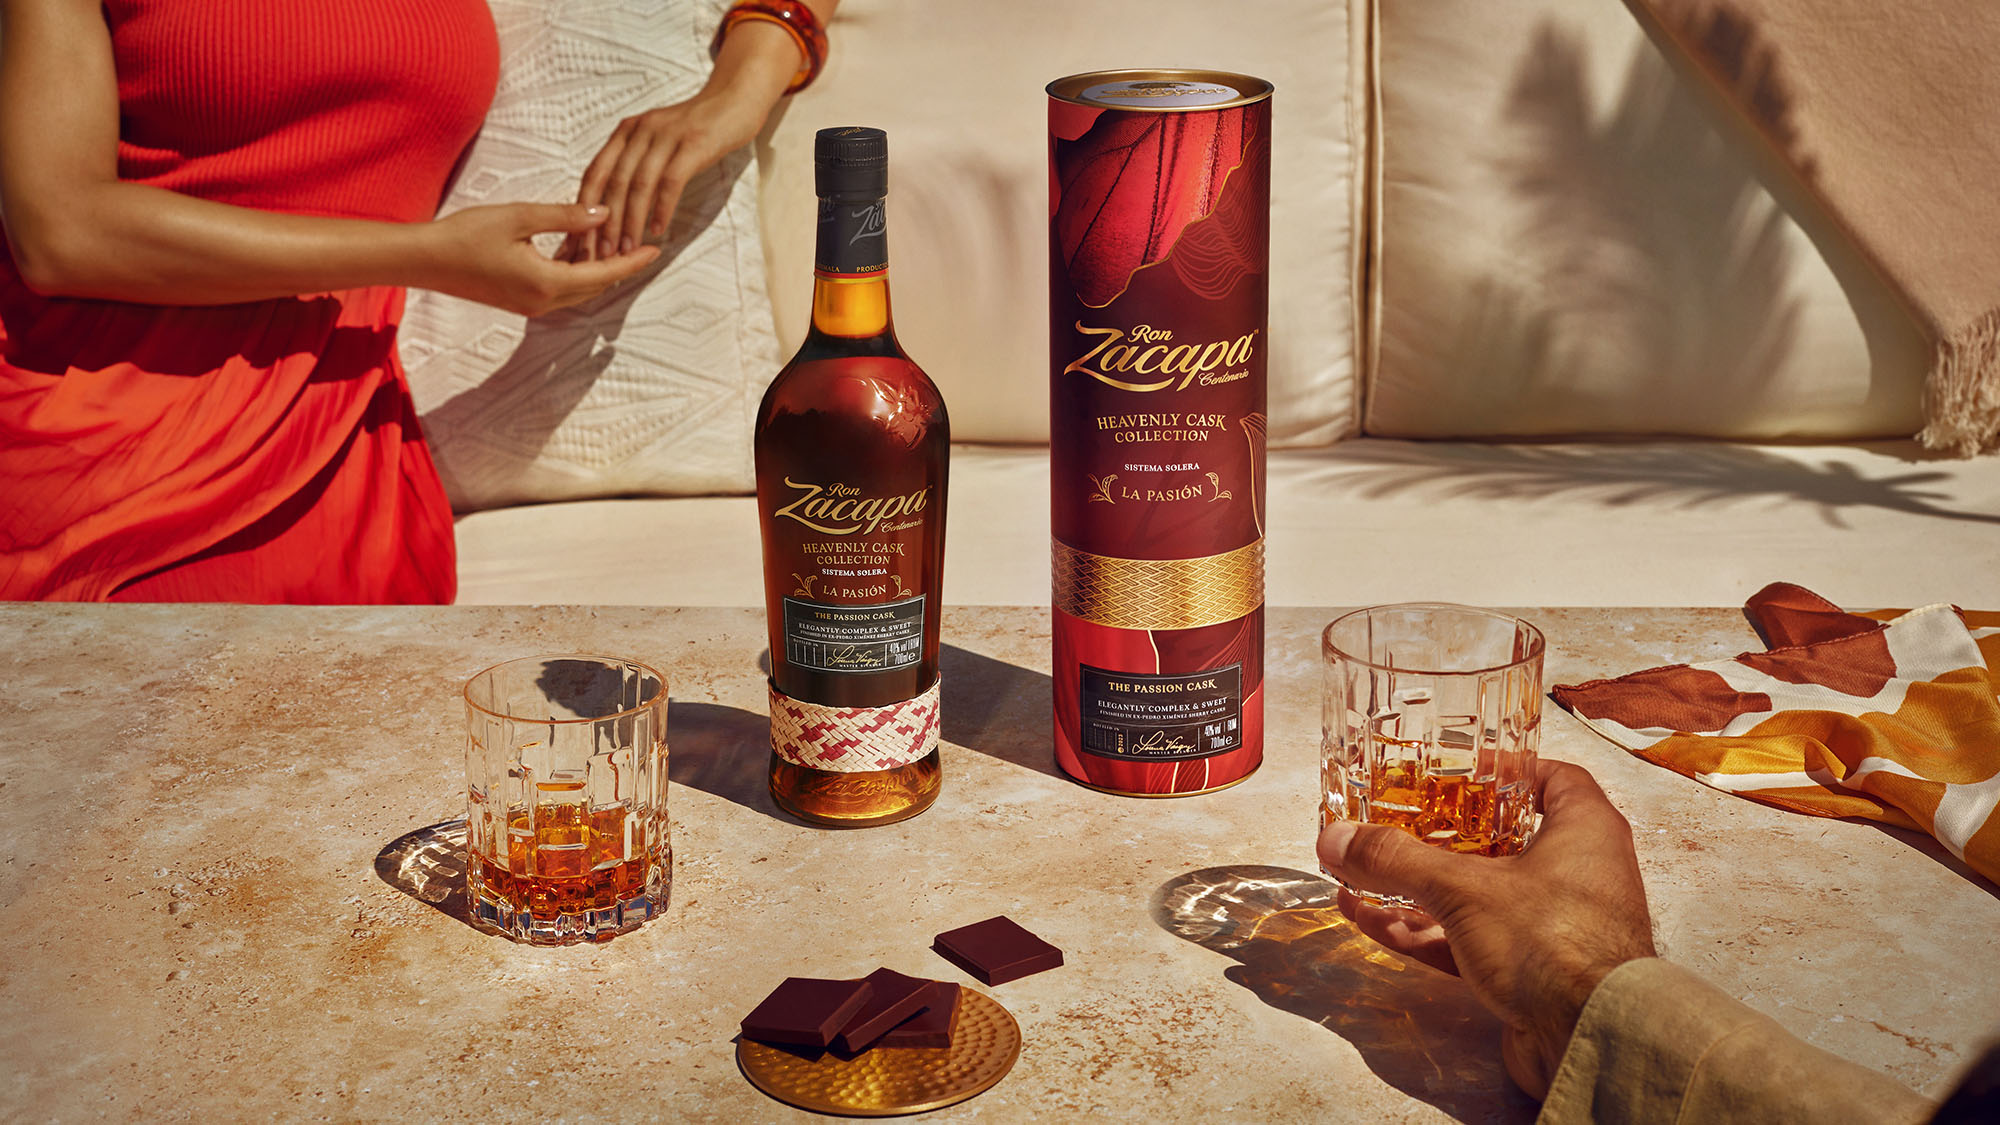 Zacapa Adds La Pasión, The Passion Cask, To Heavenly Cask Collection